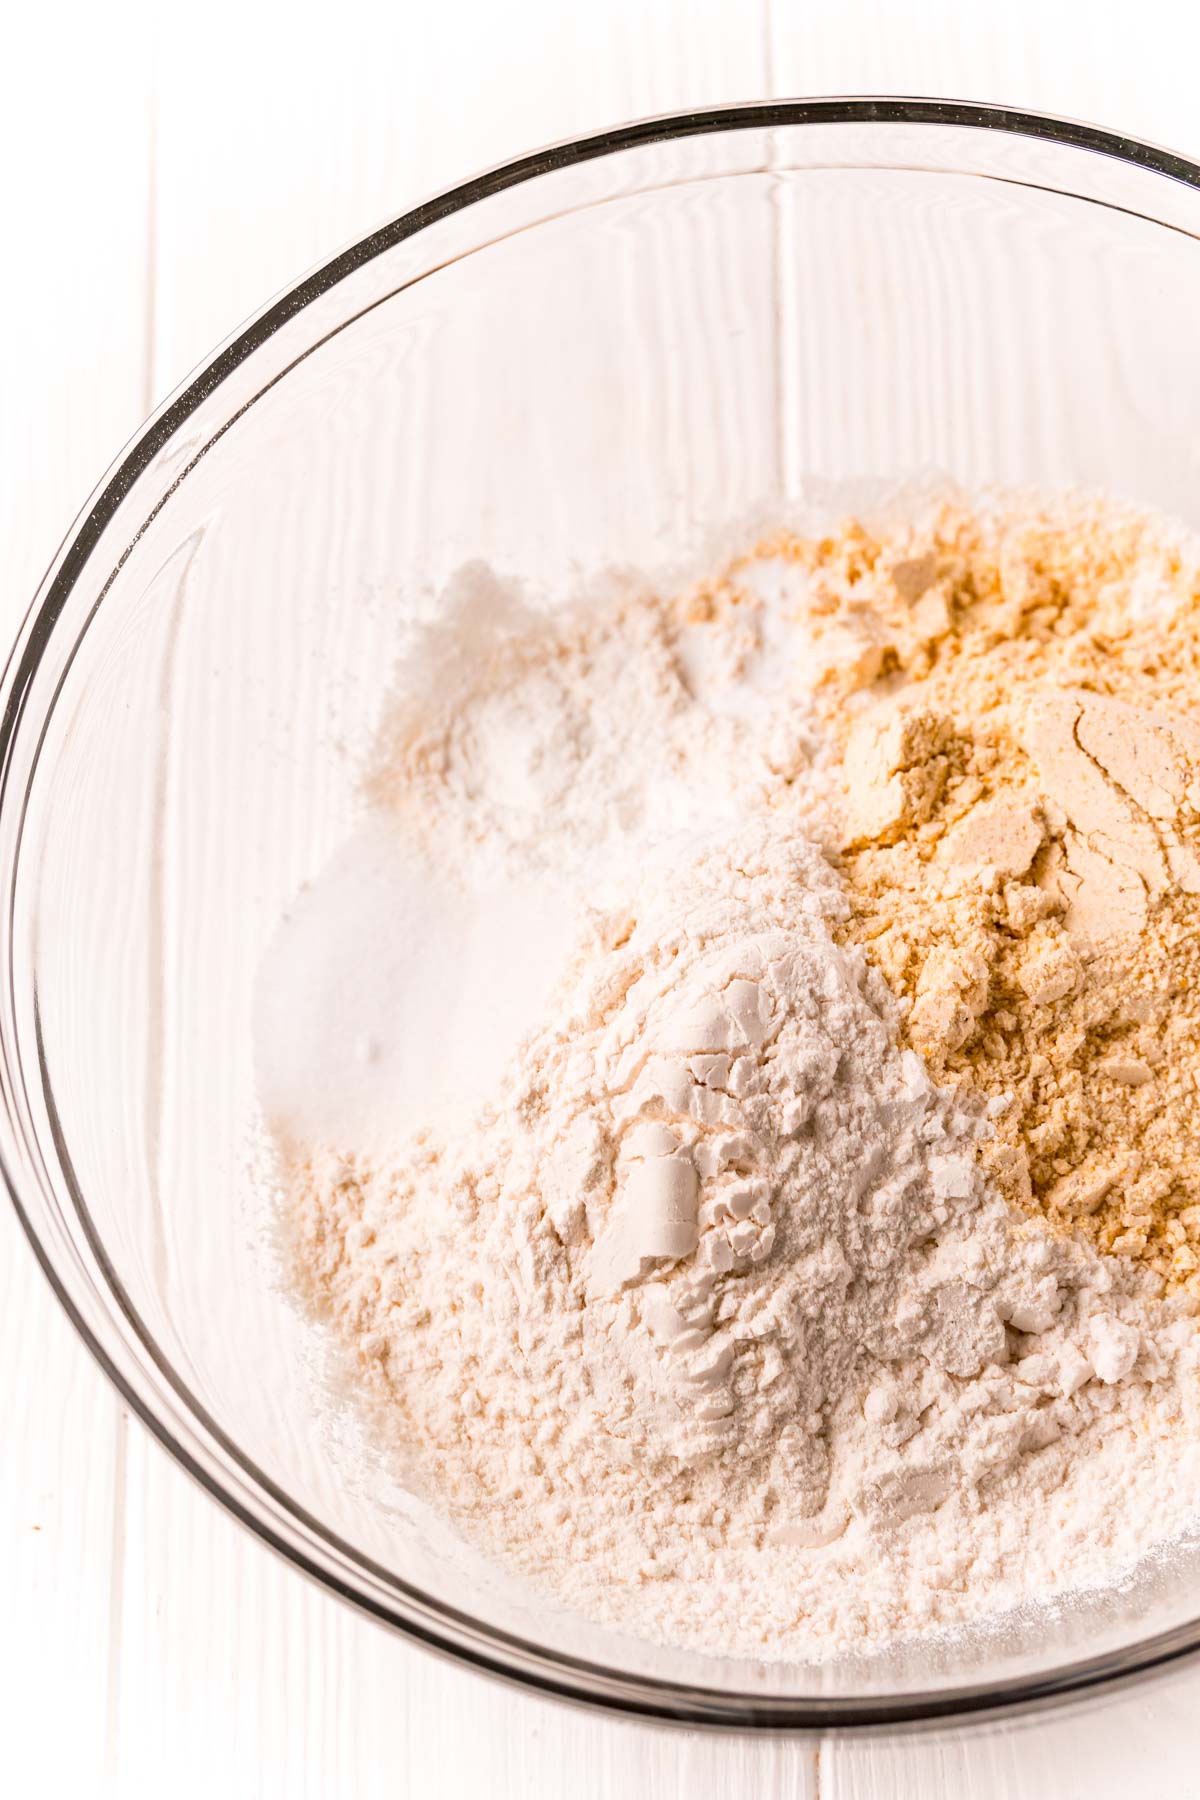 Flour, cornmeal, and sugar in a glass mixing bowl.